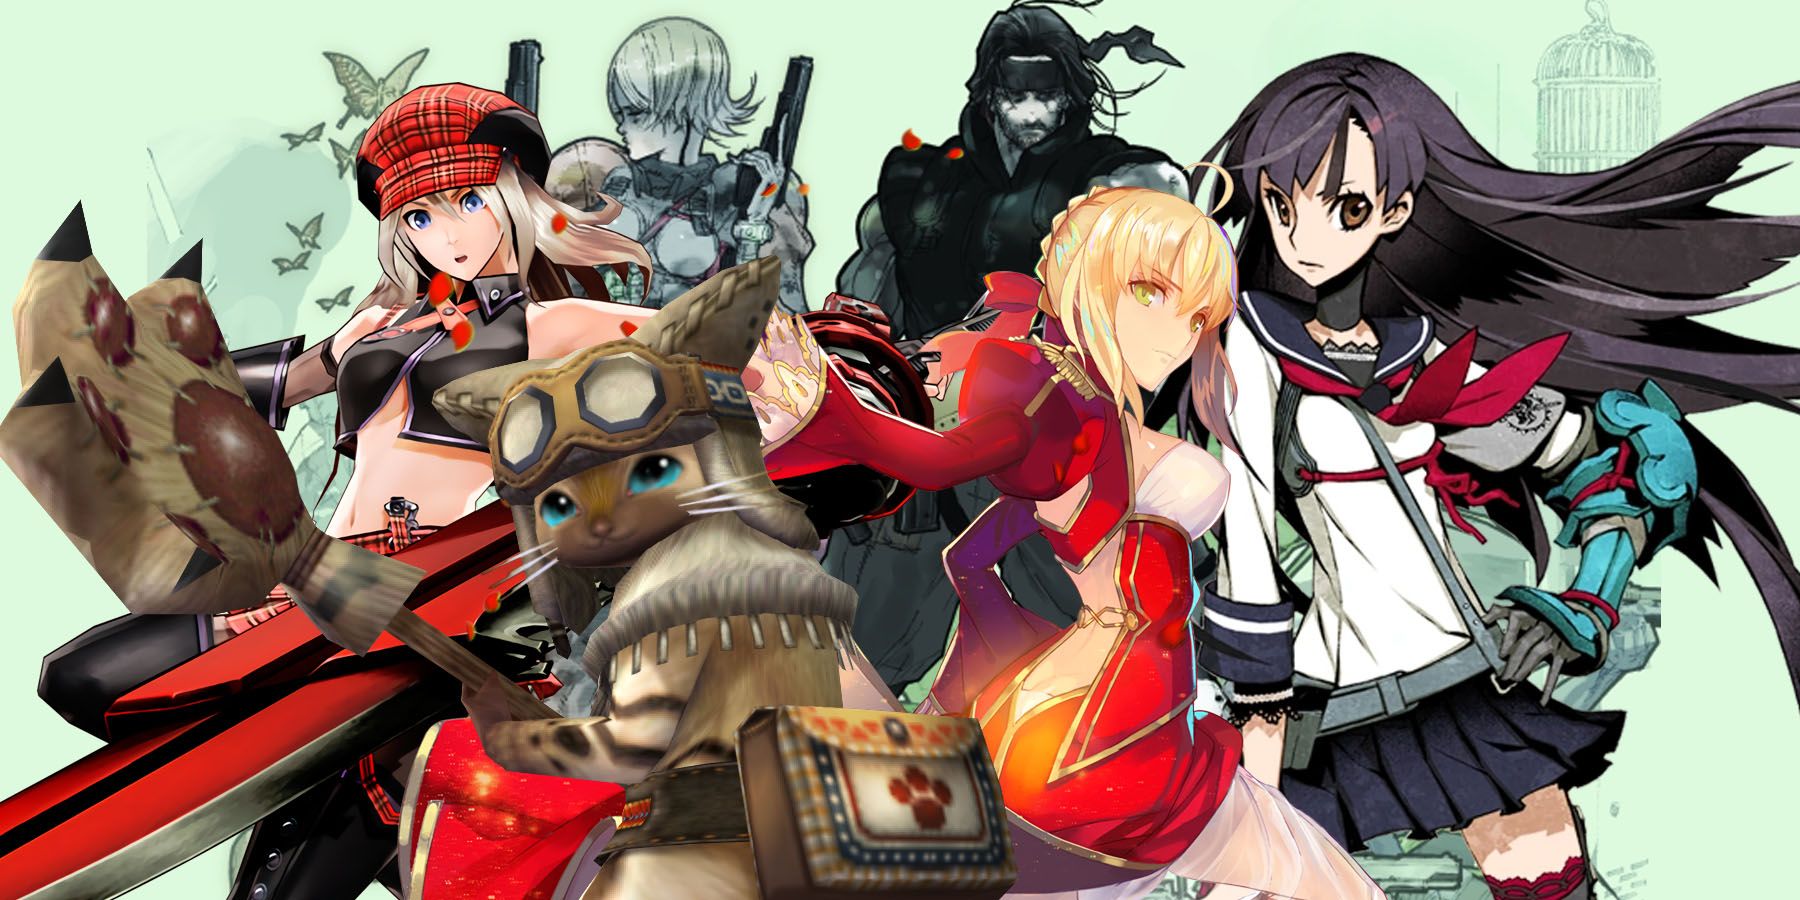 The 25 Best PSP Games of All-Time